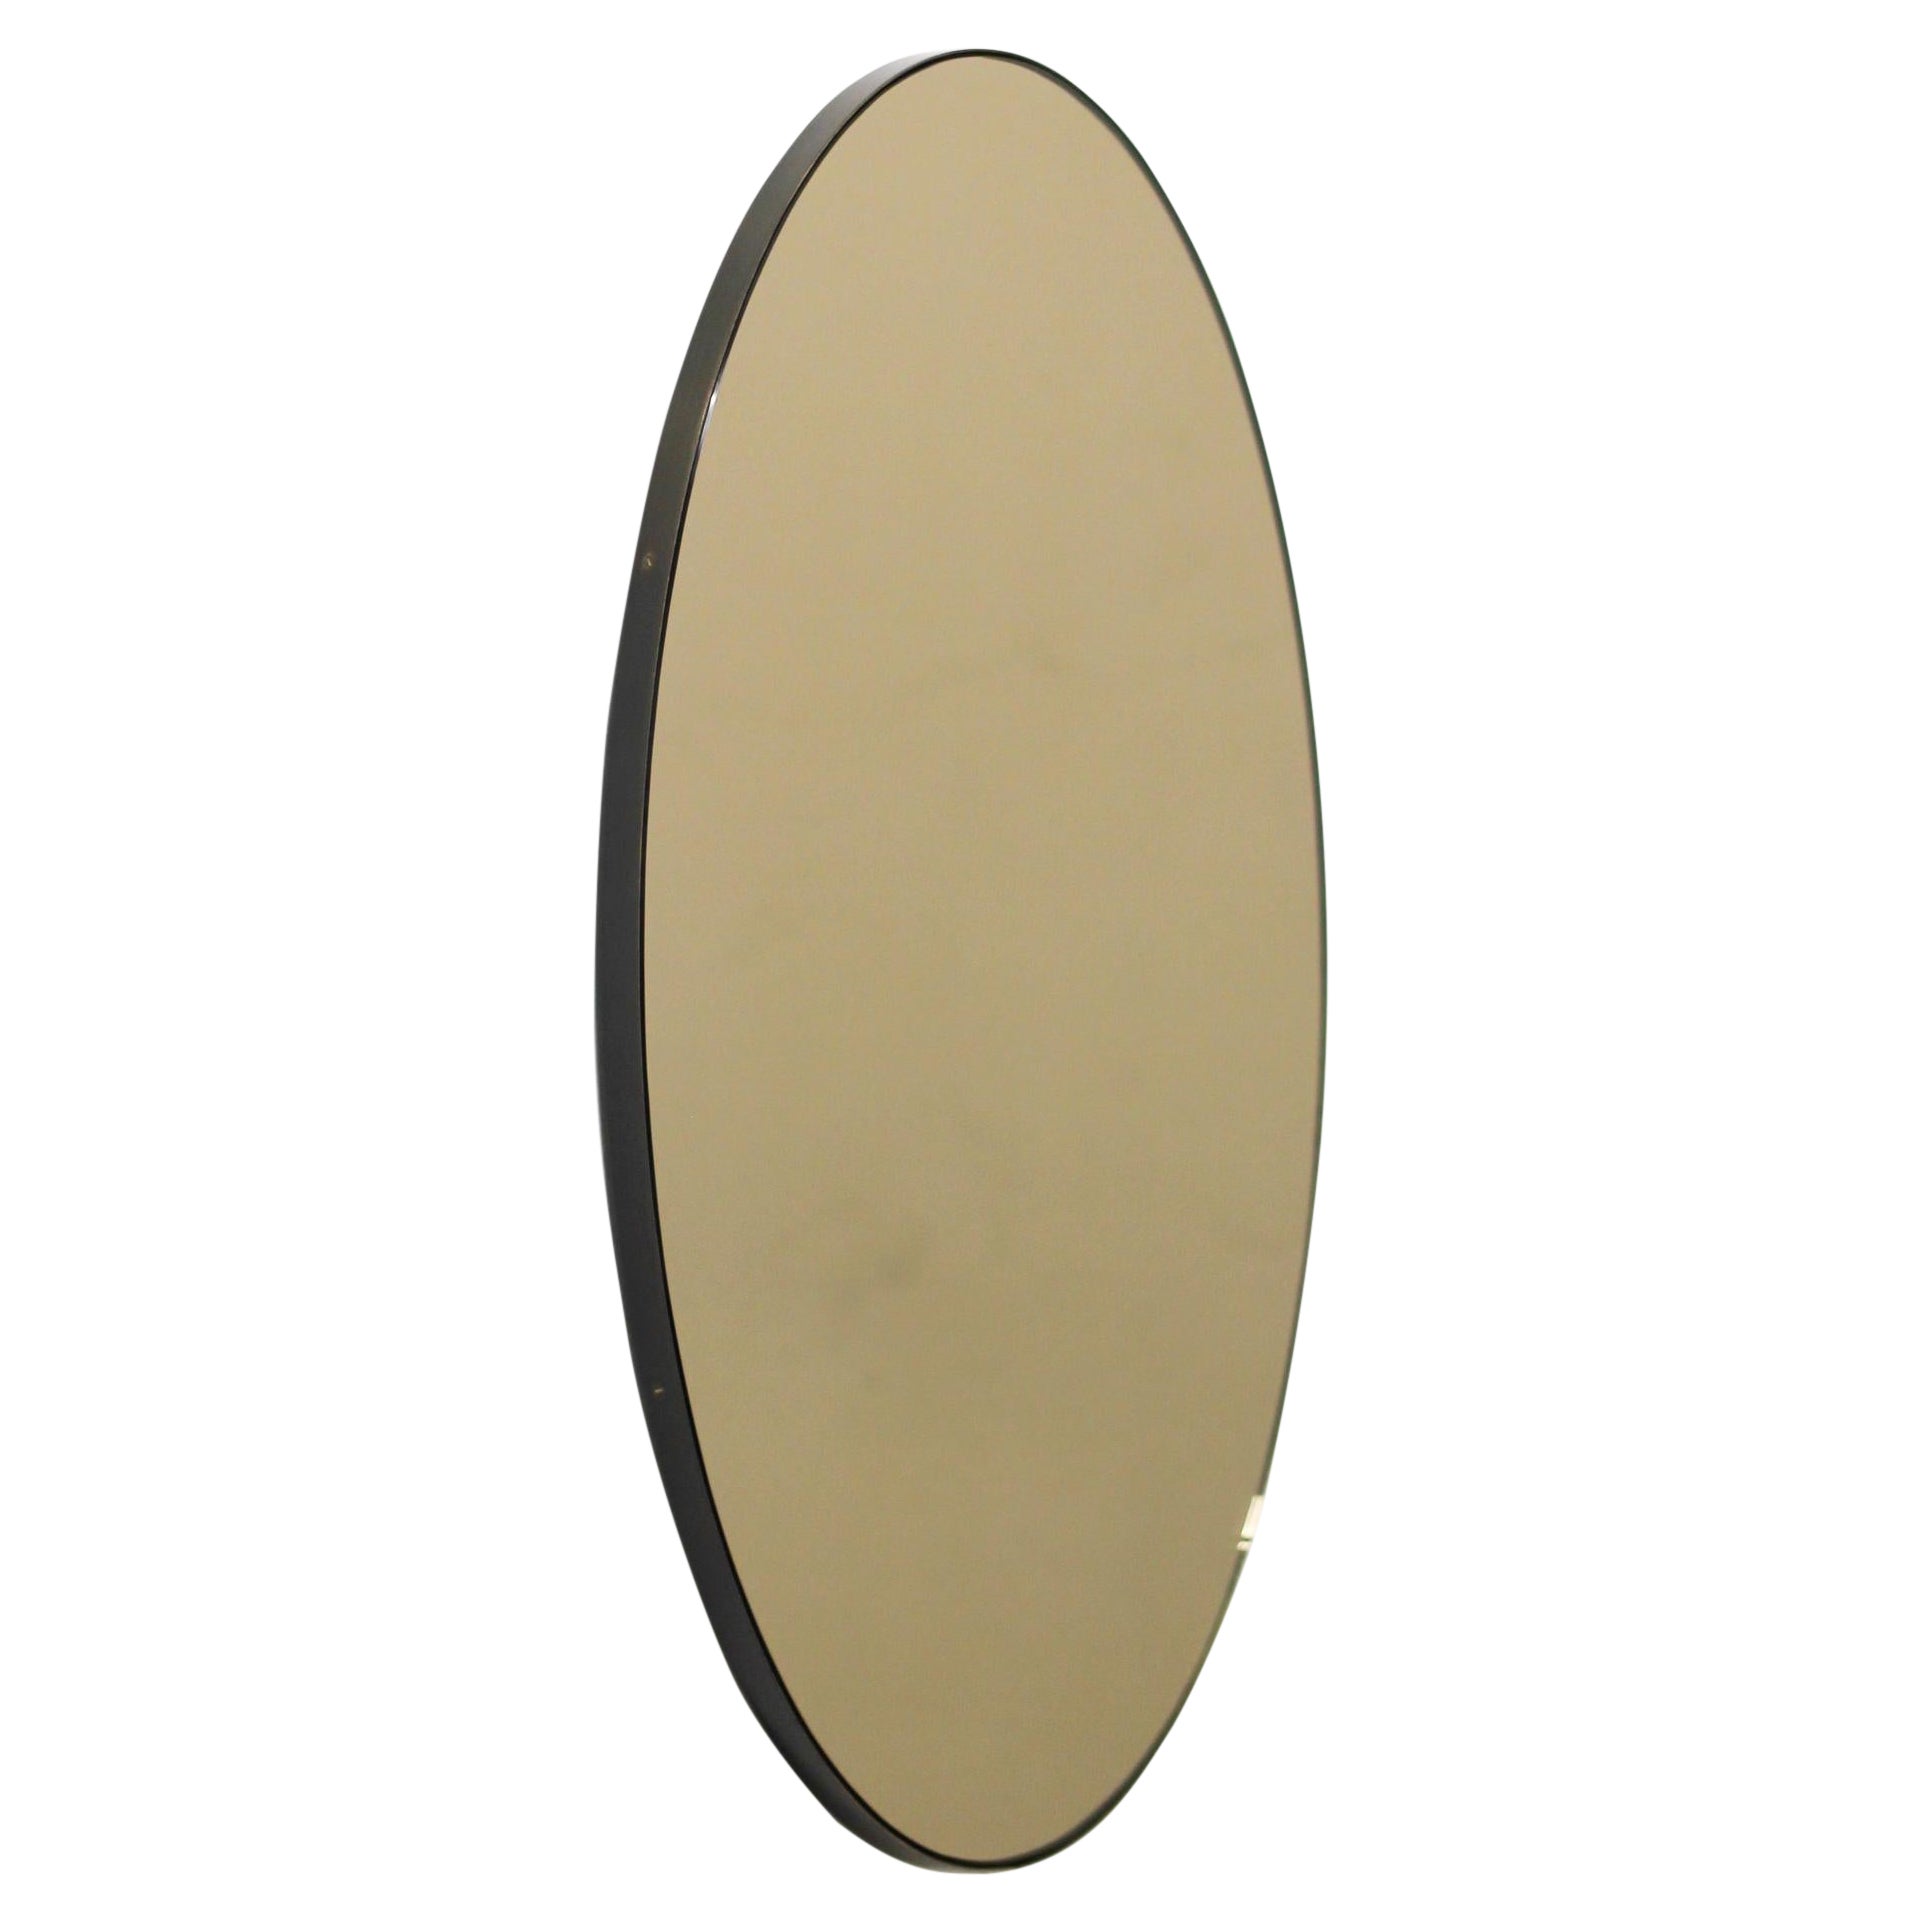 Ovalis Oval Bronze Tinted Modern Mirror with Patina Frame, Large For Sale